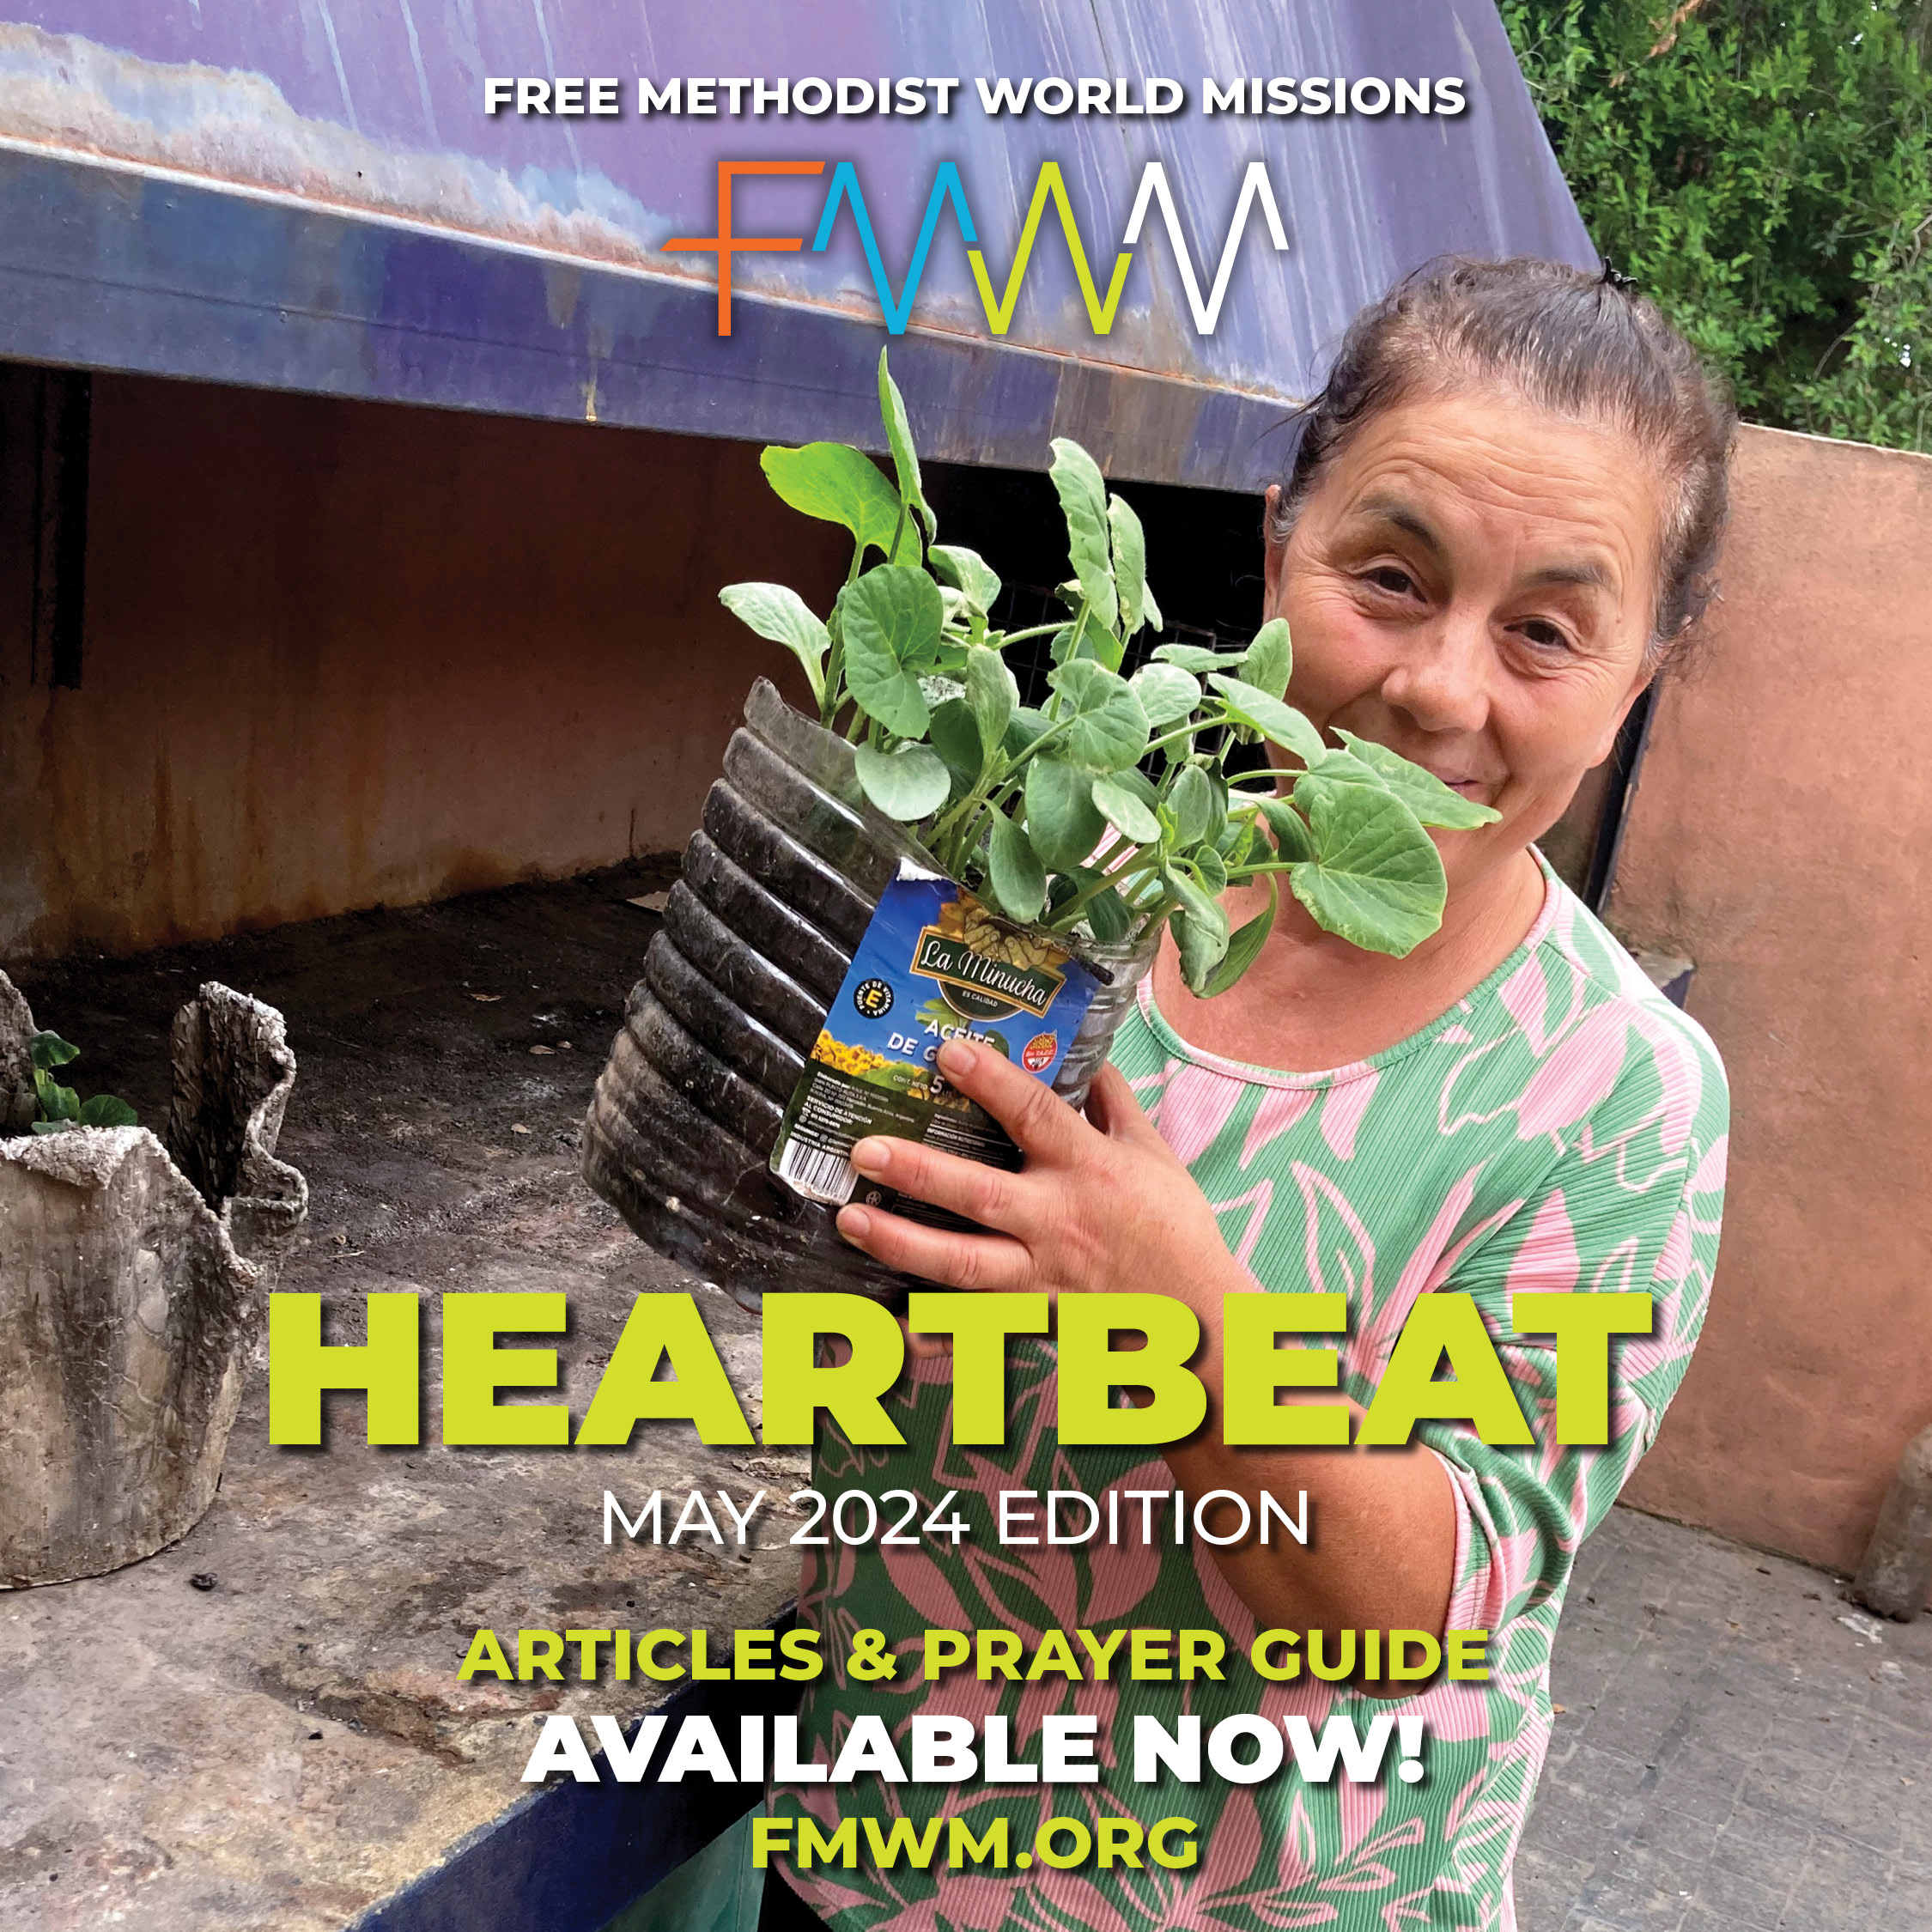 Available Now Heartbeat 0524